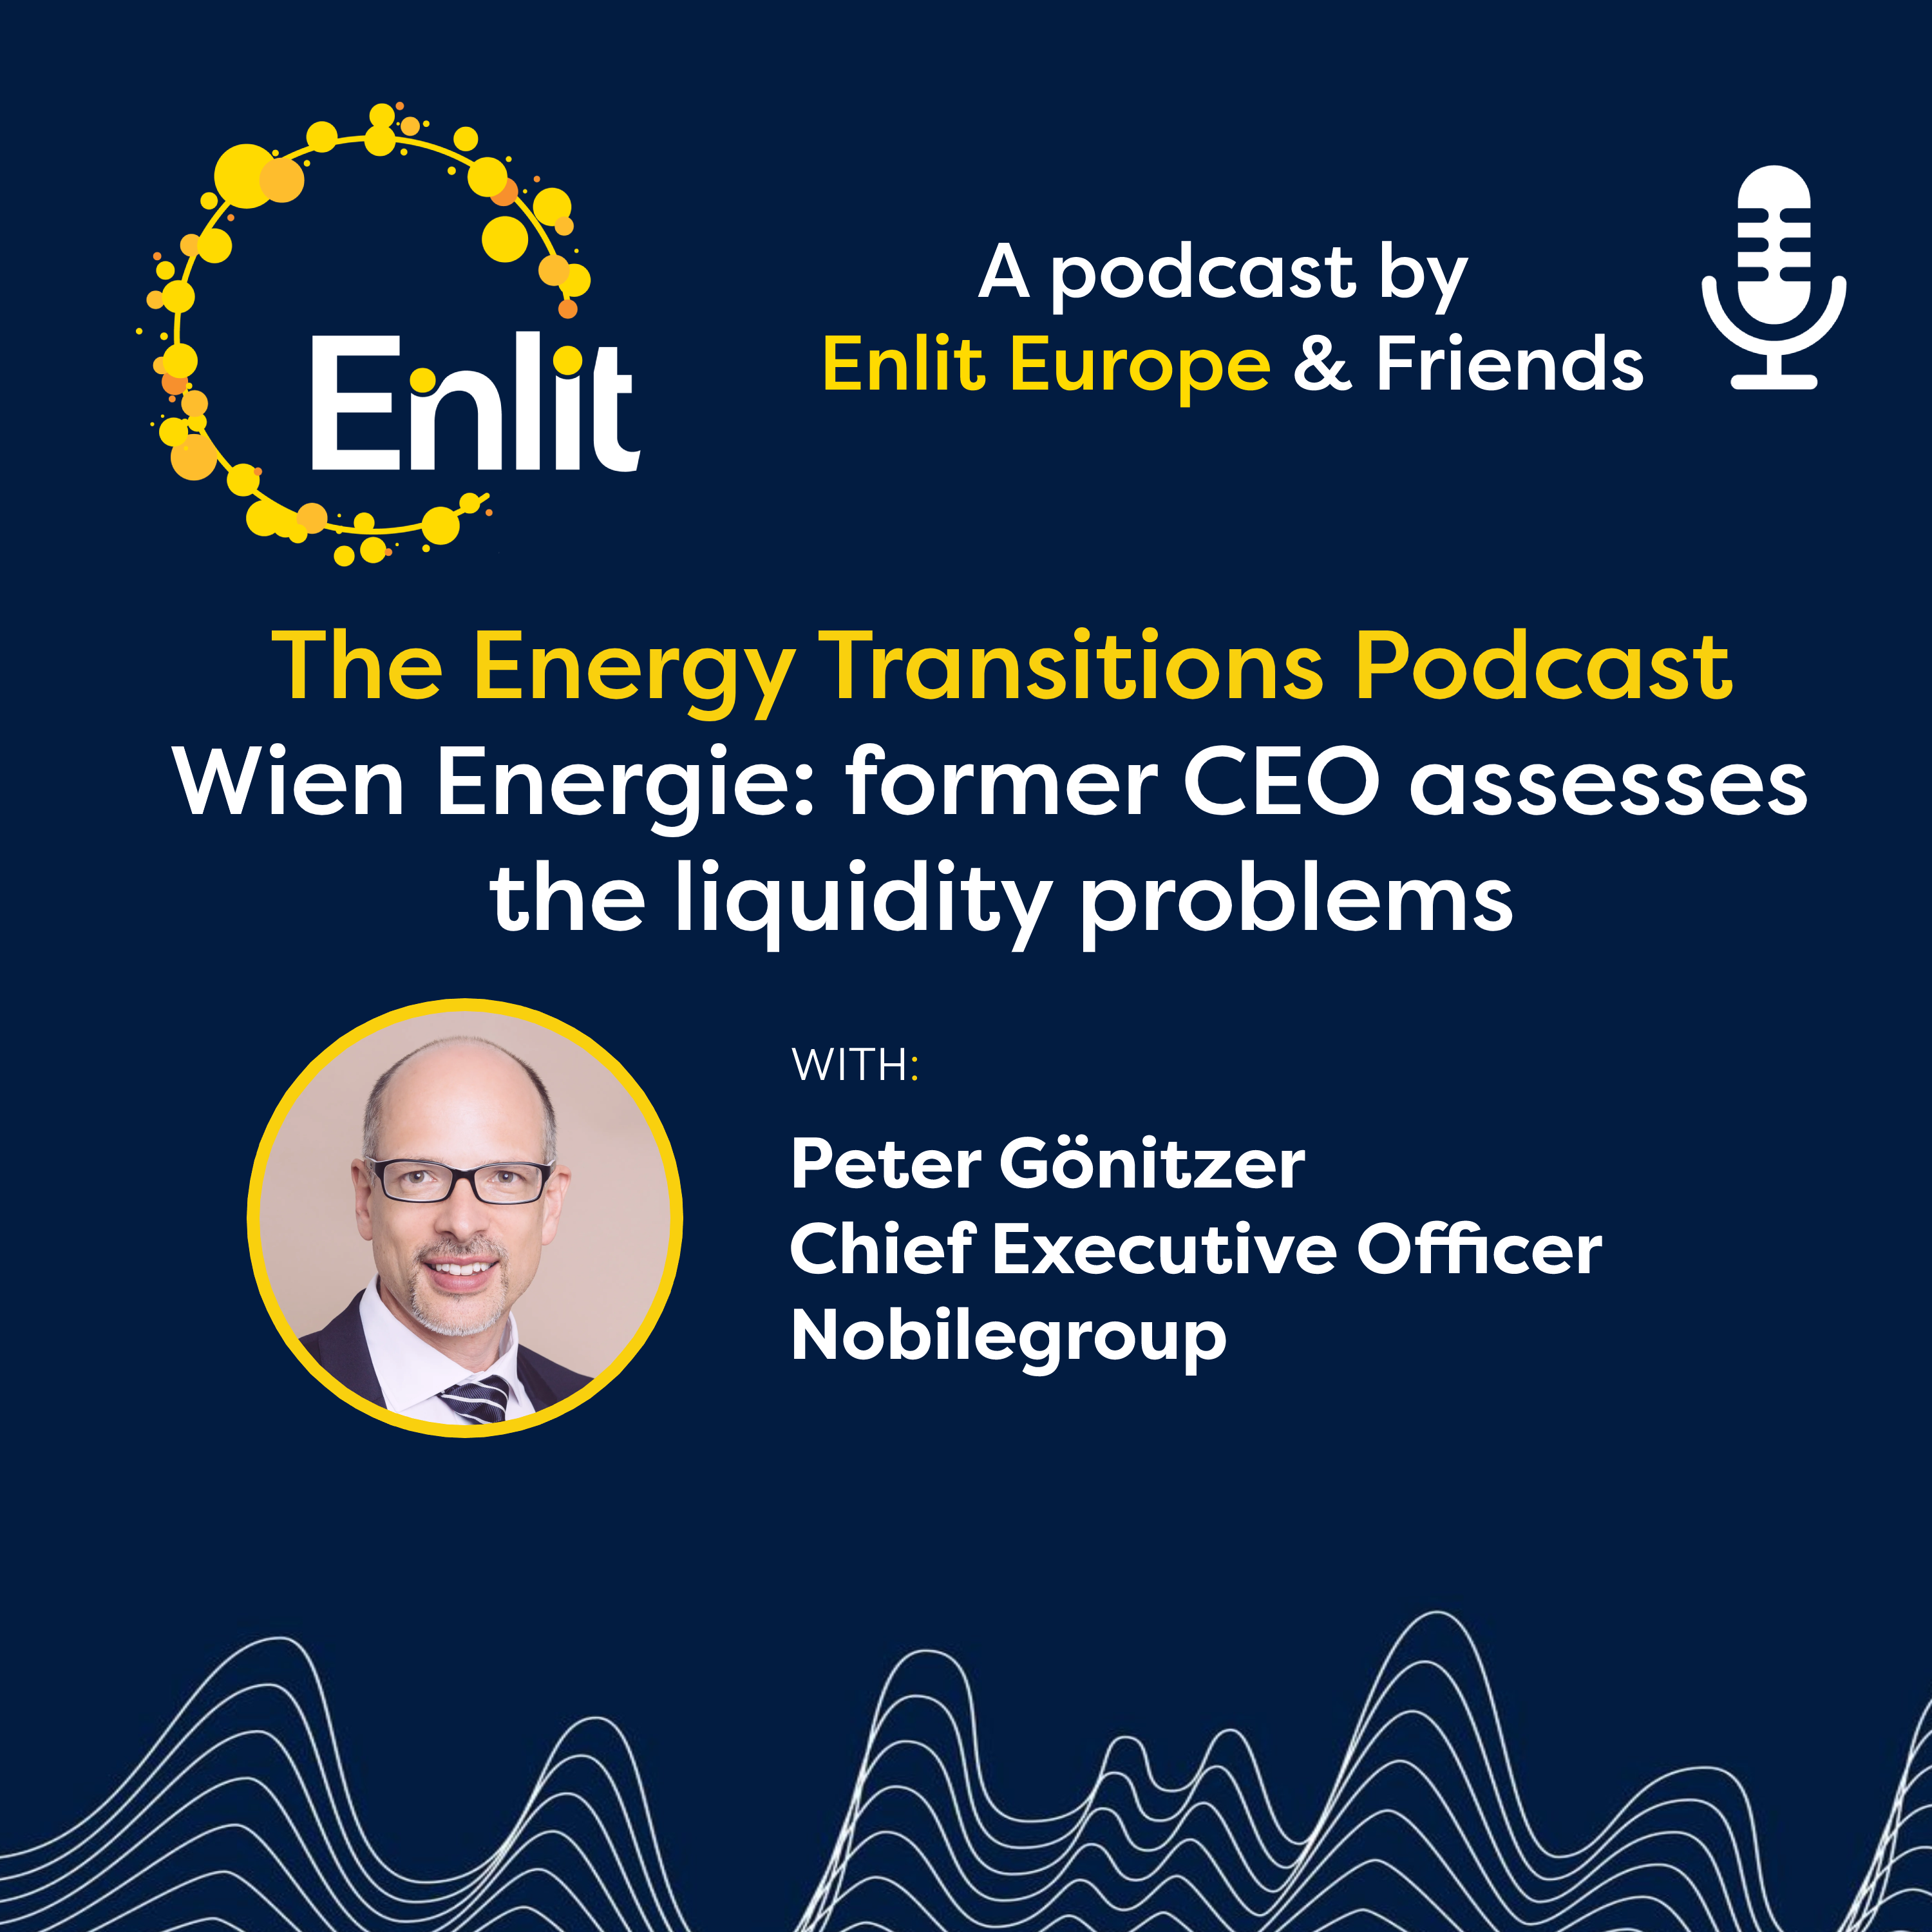 Wien Energie - former CEO assesses liquidity problems